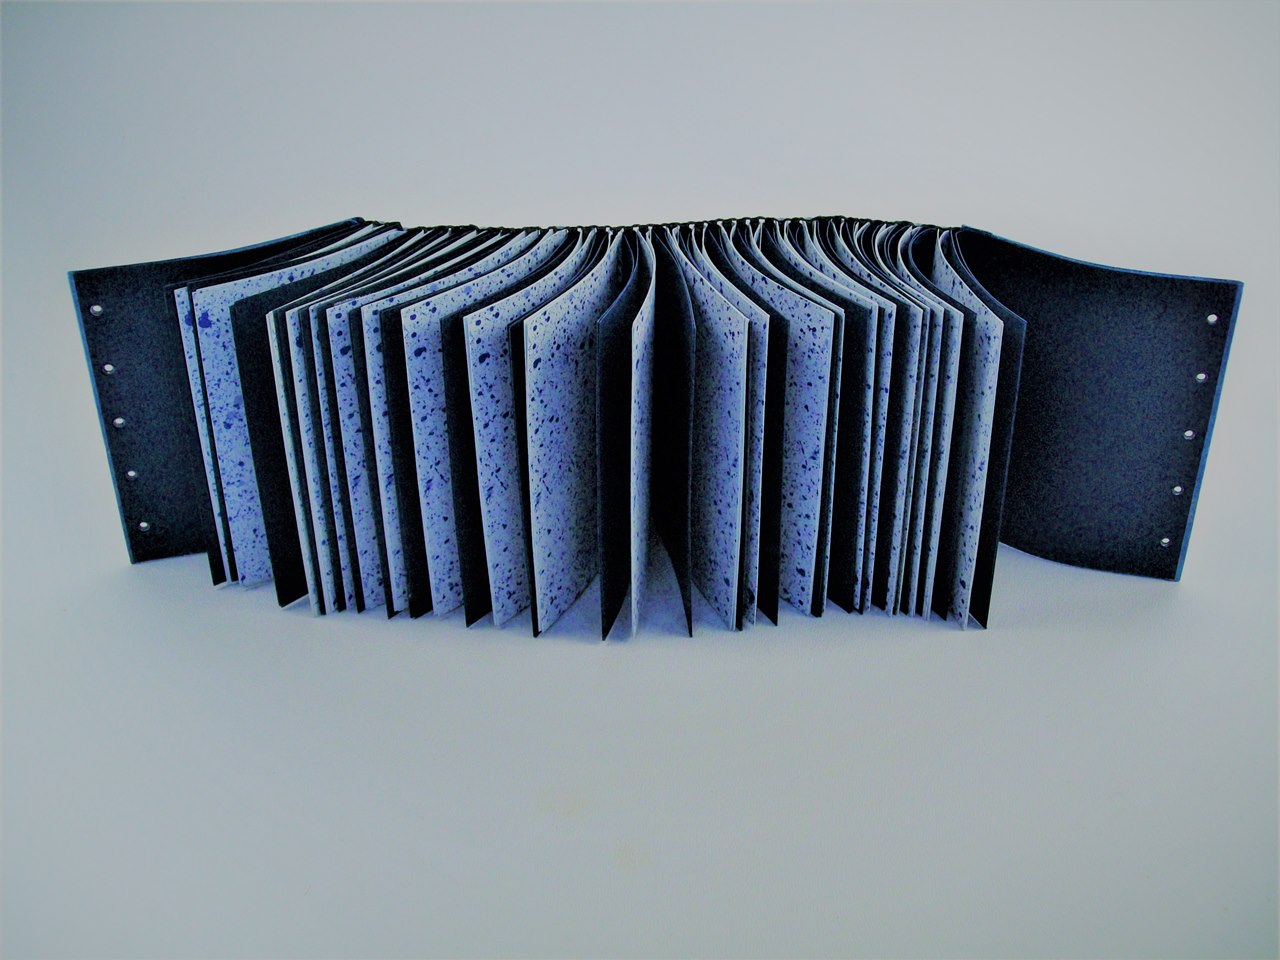 hinged book - from workshop (4)